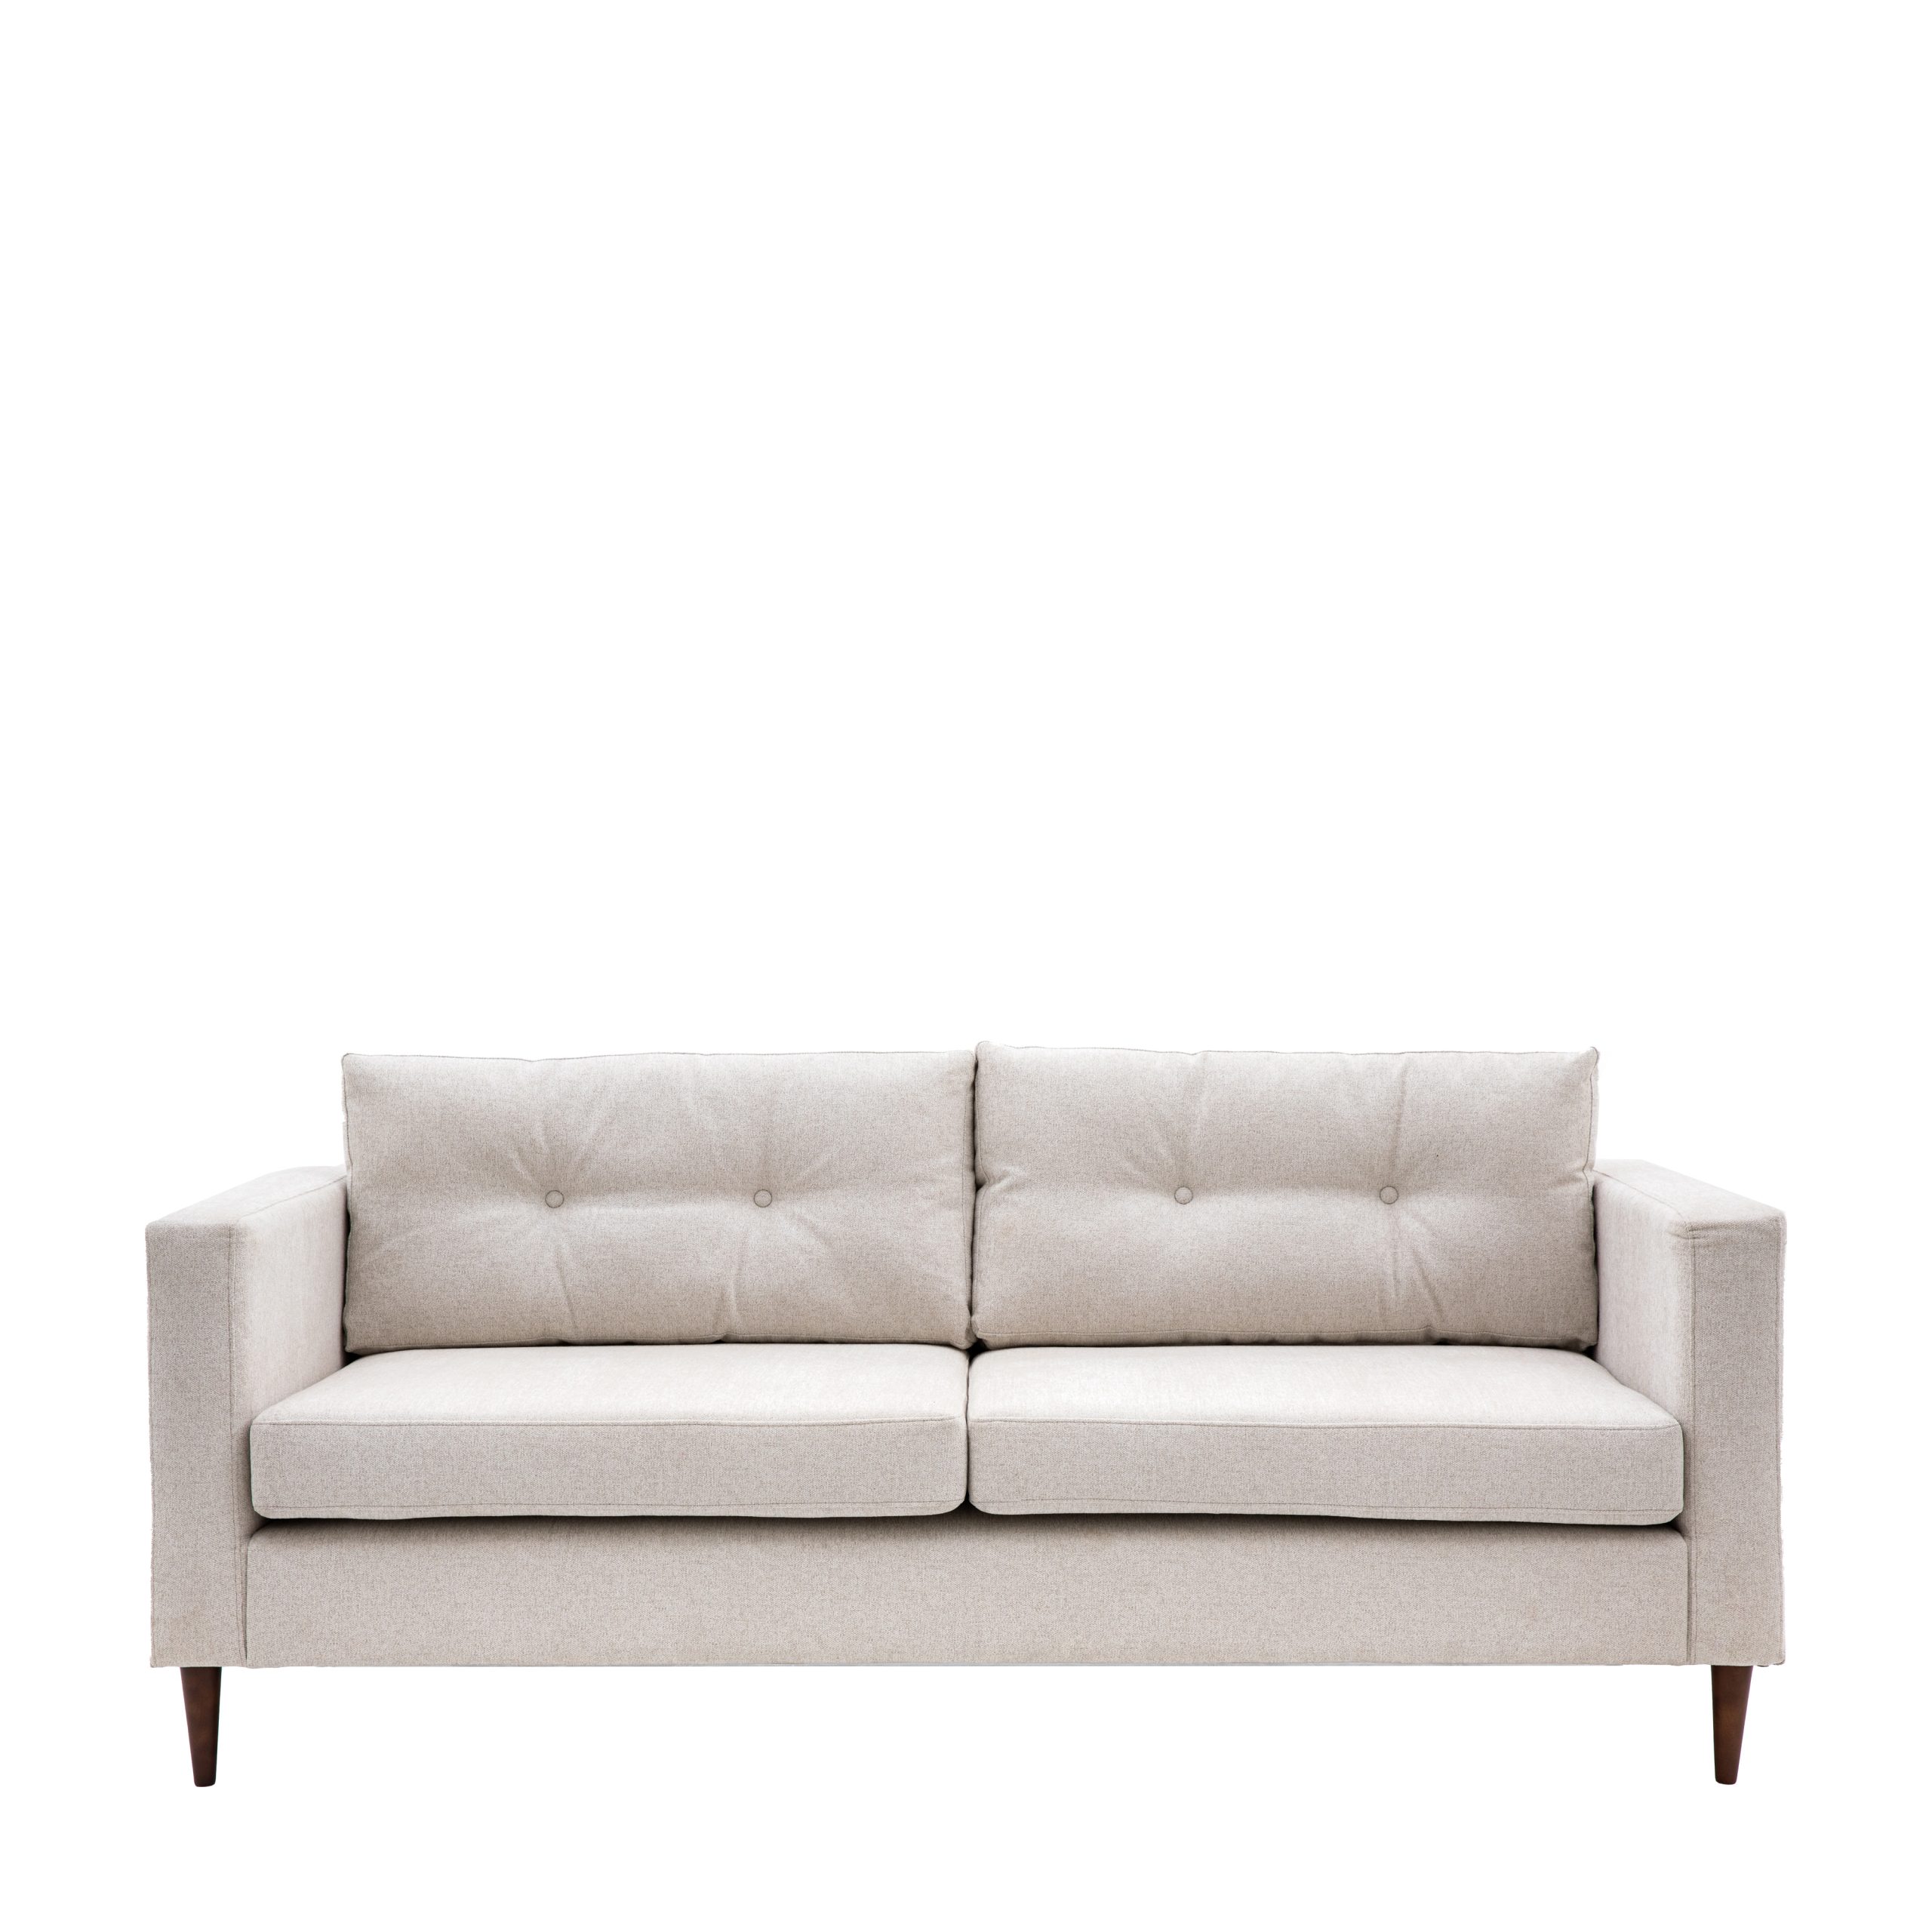 Gallery Direct Whitwell Sofa 3 Seater Light Grey